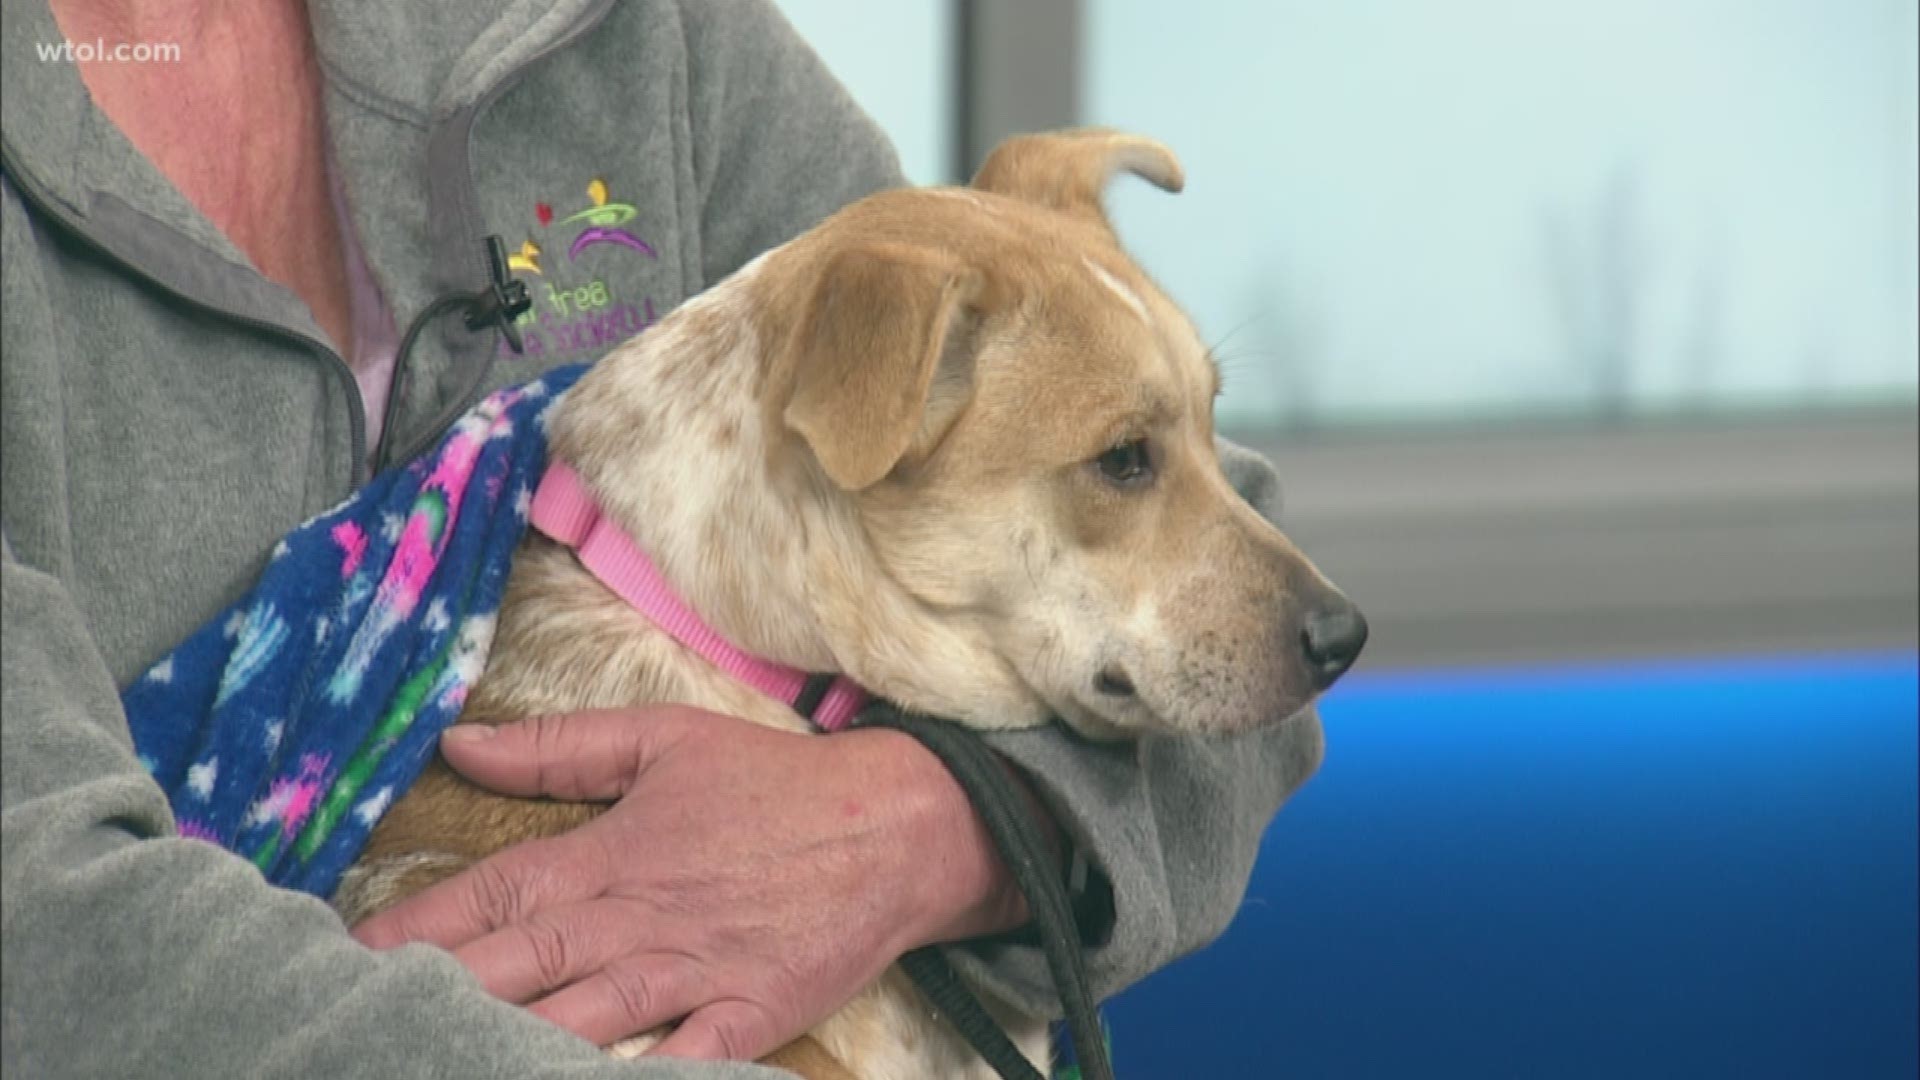 Meet Princess, an sweet, cuddly girl who lives up to her name! Adopt her at Toledo Area Humane Society!